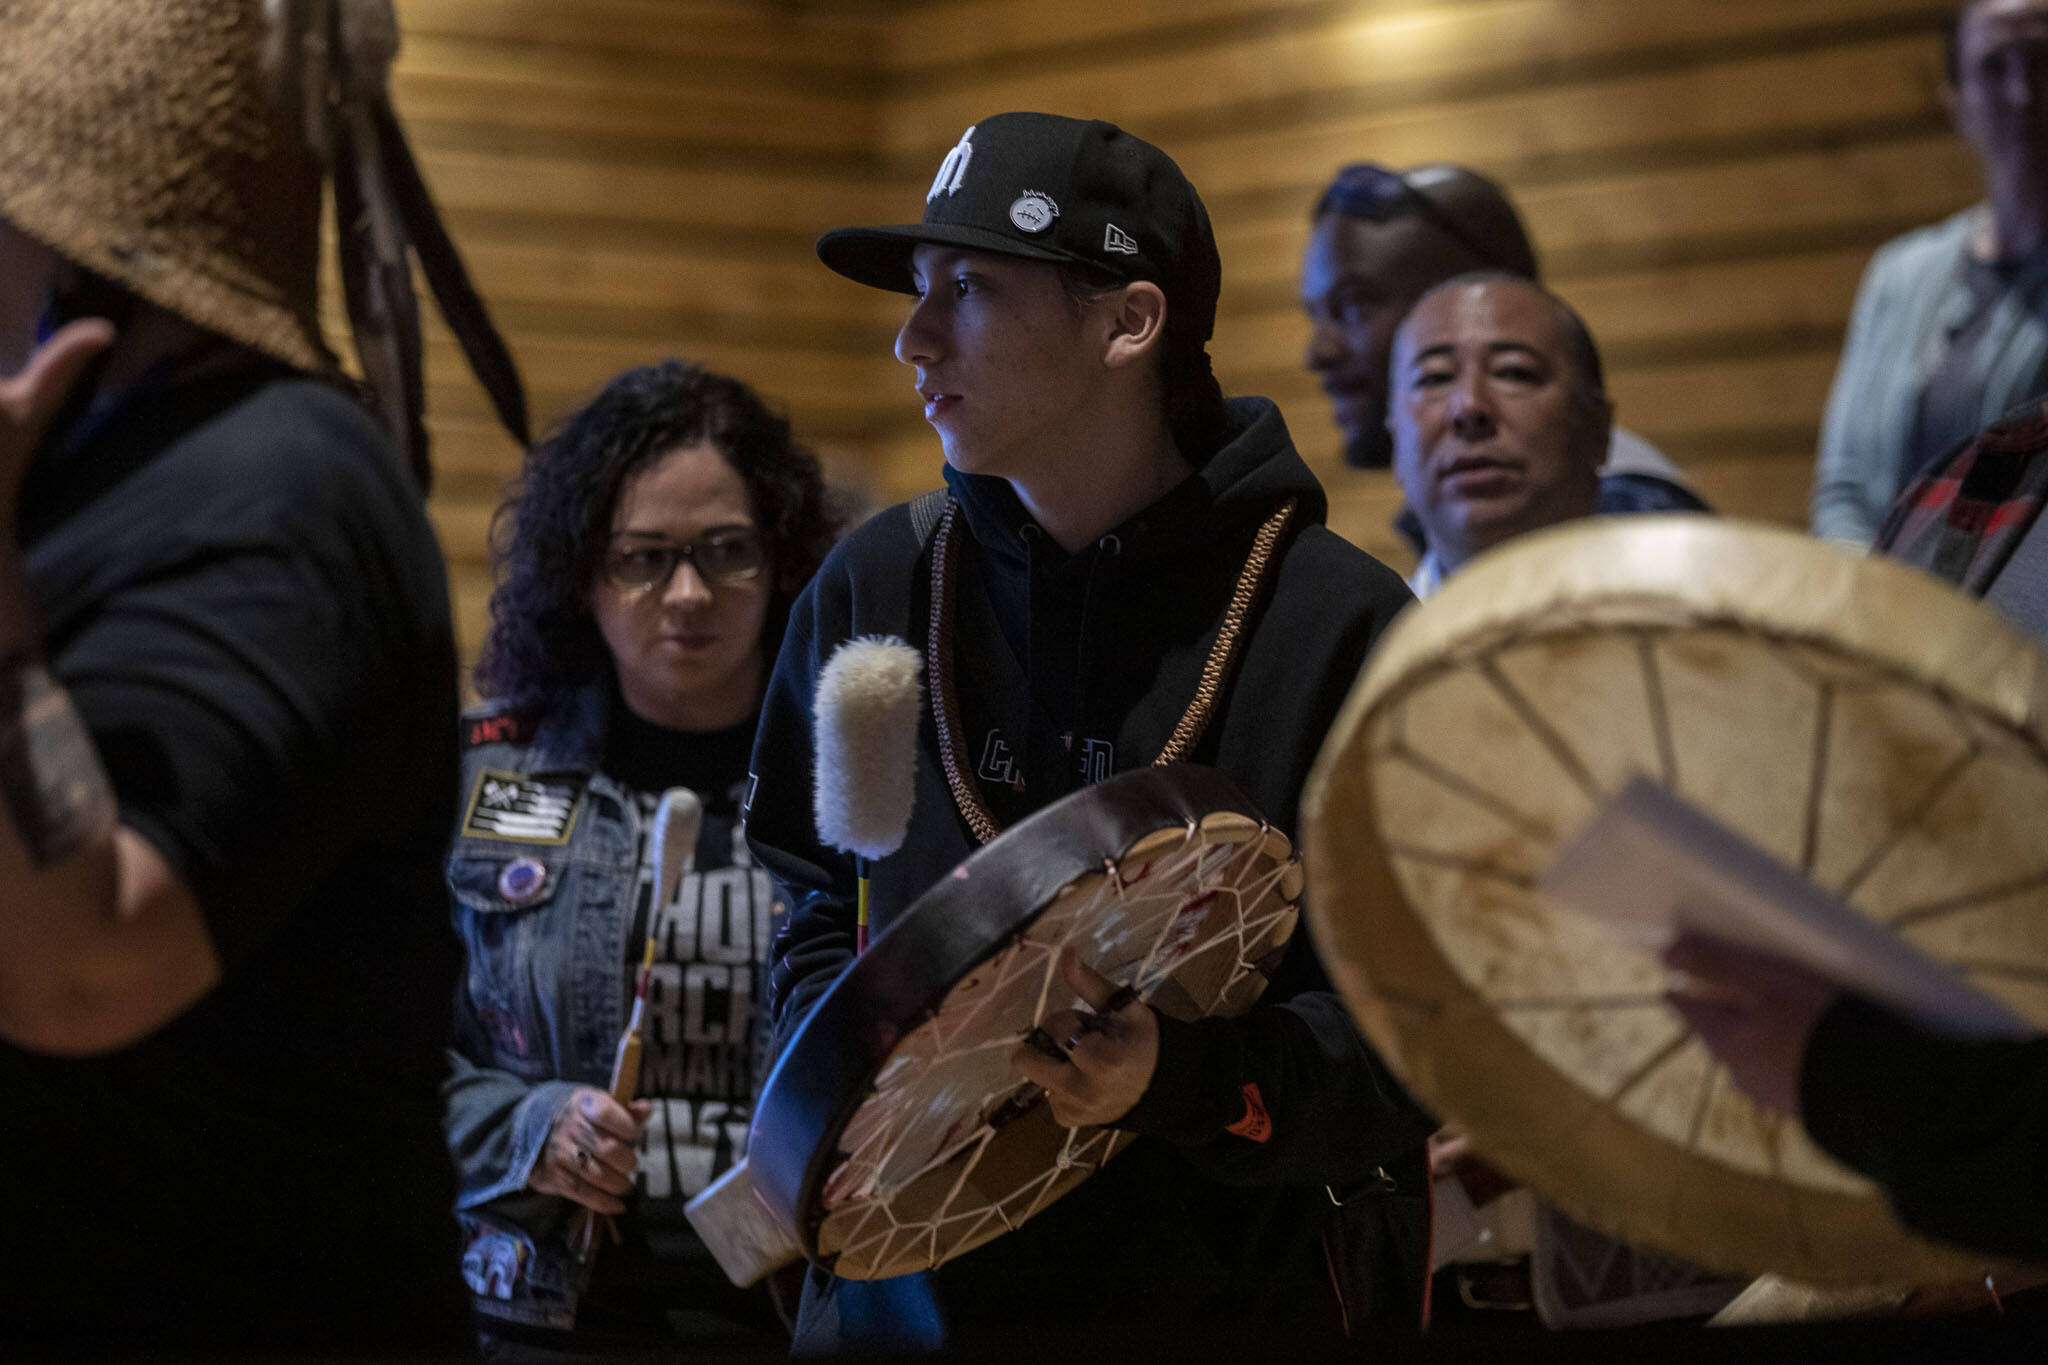 A welcome song is played and sang by Tulalip performers during a Road to Healing event at the Tulalip Gathering Hall in Marysville, Washington on Sunday, April 23, 2023. The tour is lead by United States Secretary of the Interior Deb Haaland and Department of the Interior Assistant Secretary Bryan Newland. (Annie Barker / The Herald)